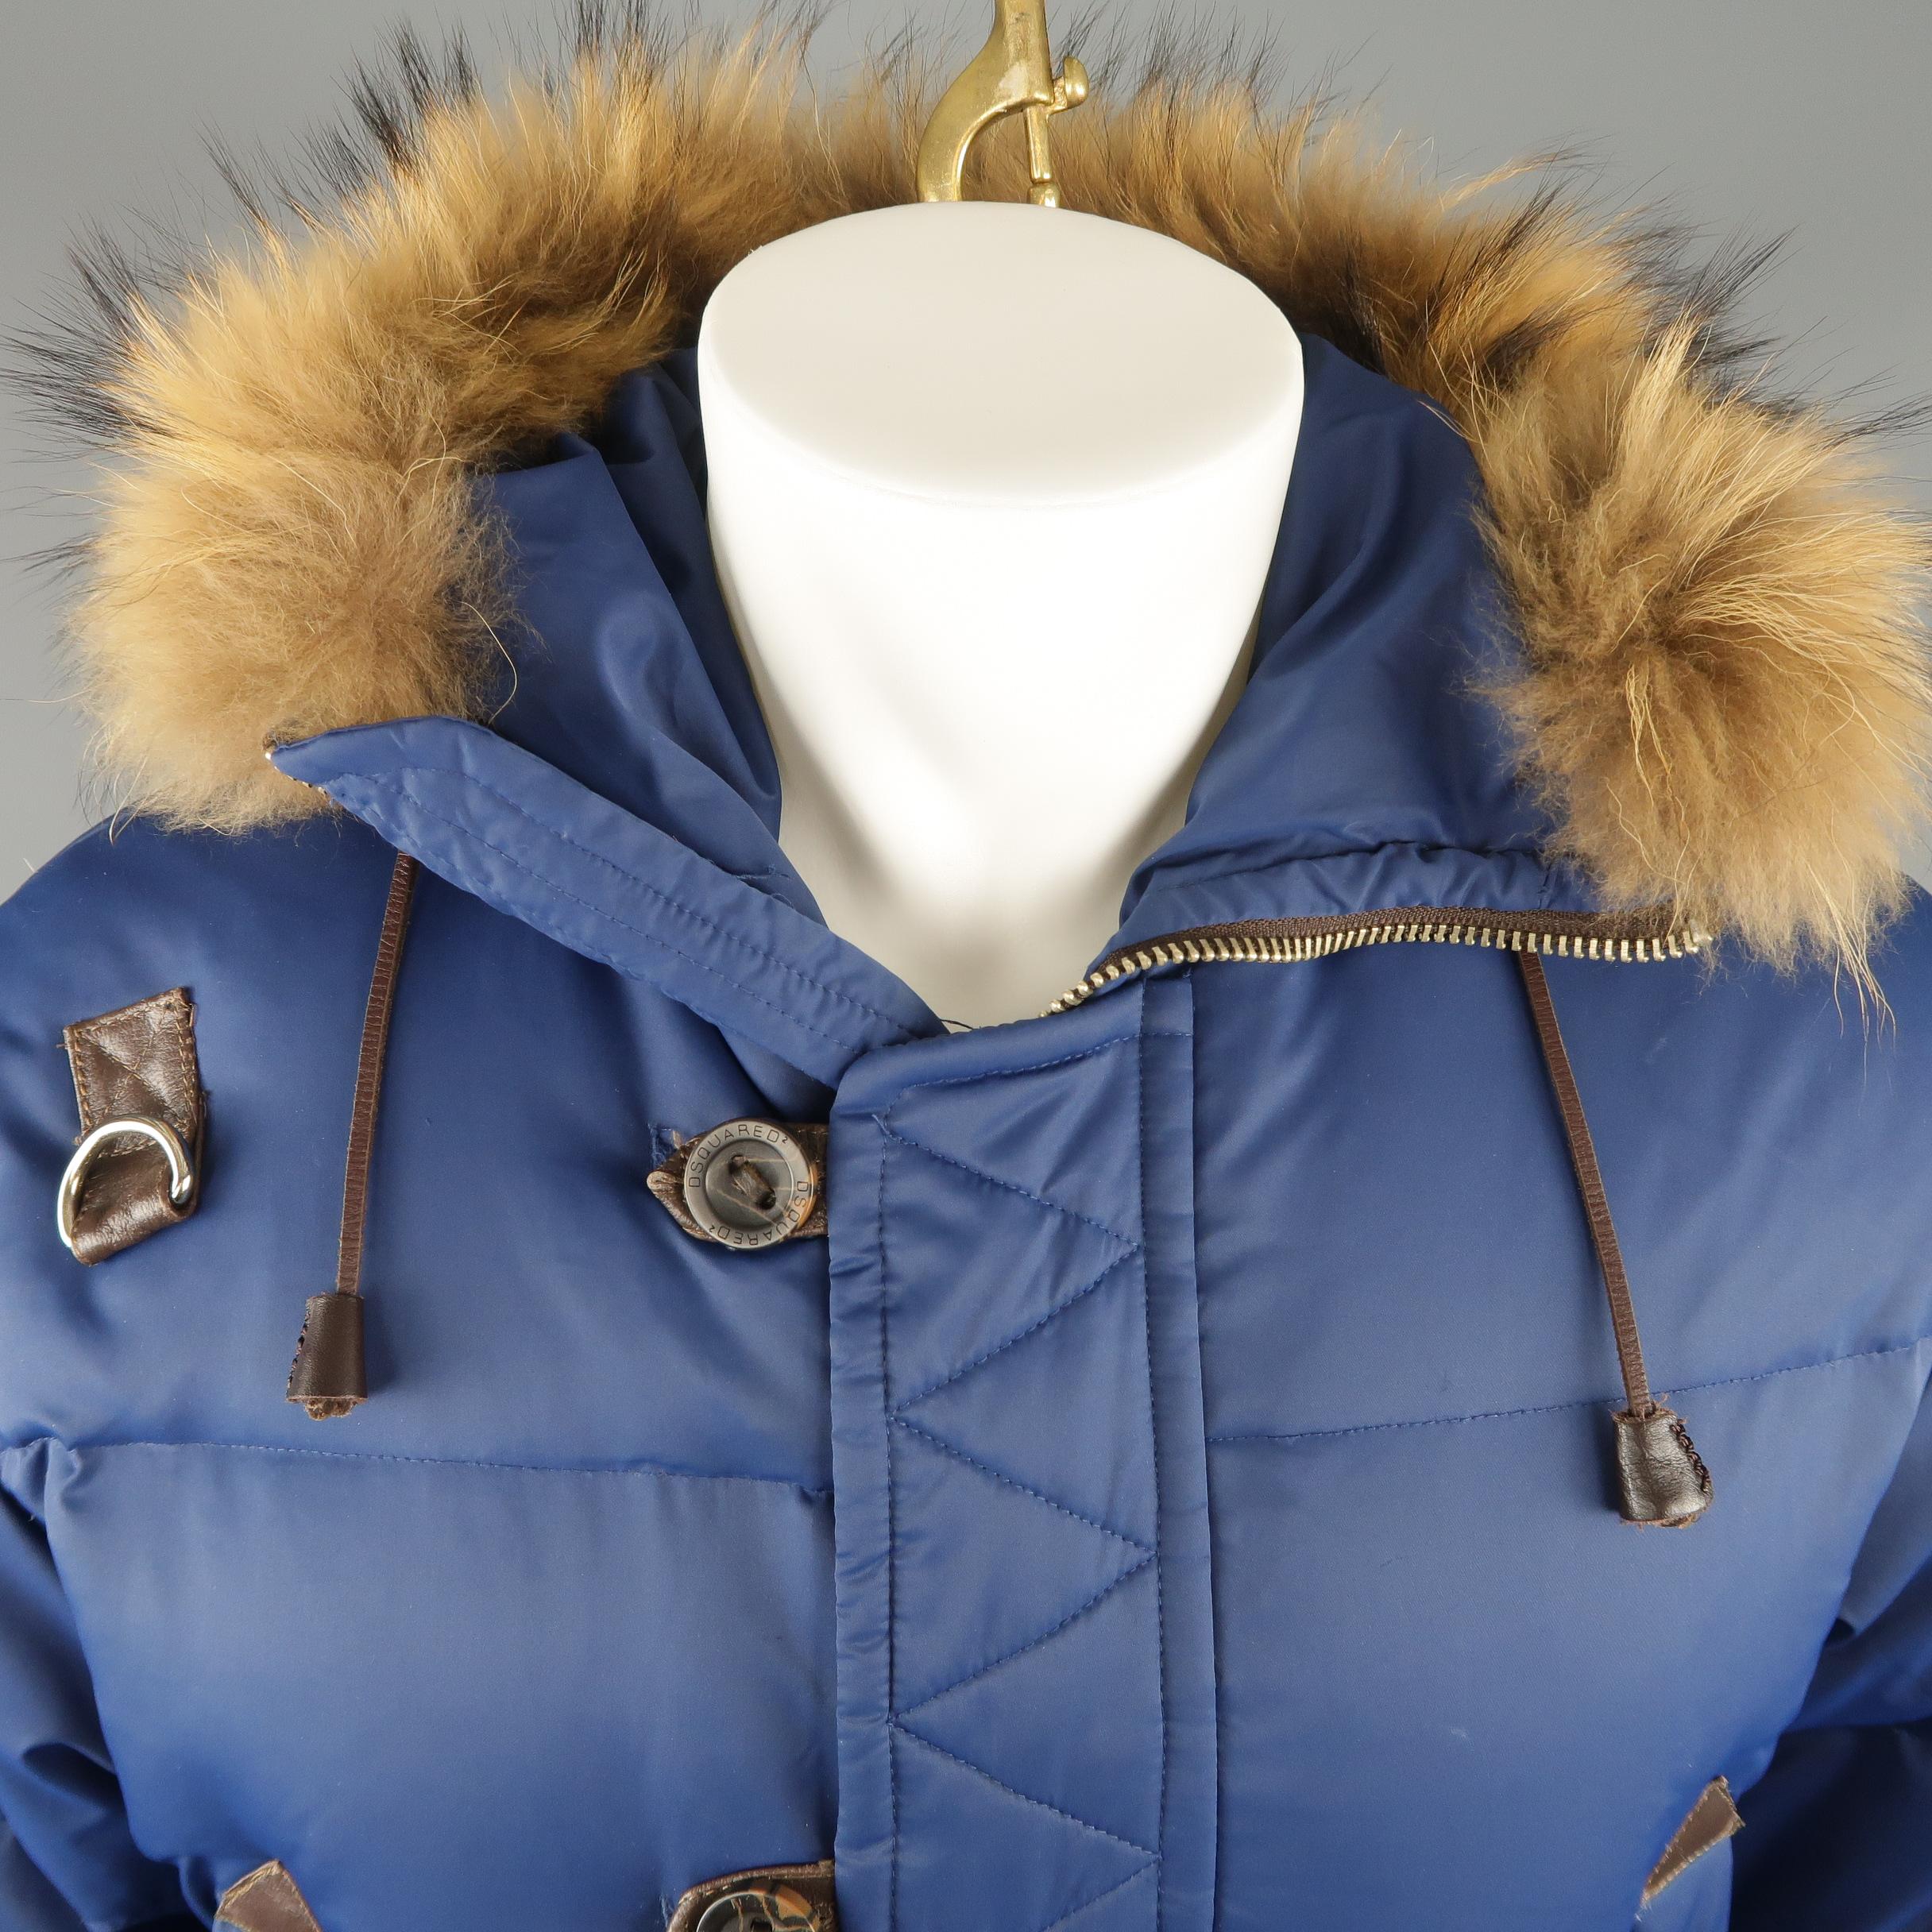 DSQUARED2 parka come sin down filled dark blue nylon with leather accents, zip front with placket, snap pockets, arm parch, and fur trimmed hood. Wear throughout.
 
Good Pre-Owned Condition.
Marked: IT 48
 
Measurements:
 
Shoulder: 21 in.
Chest: 46